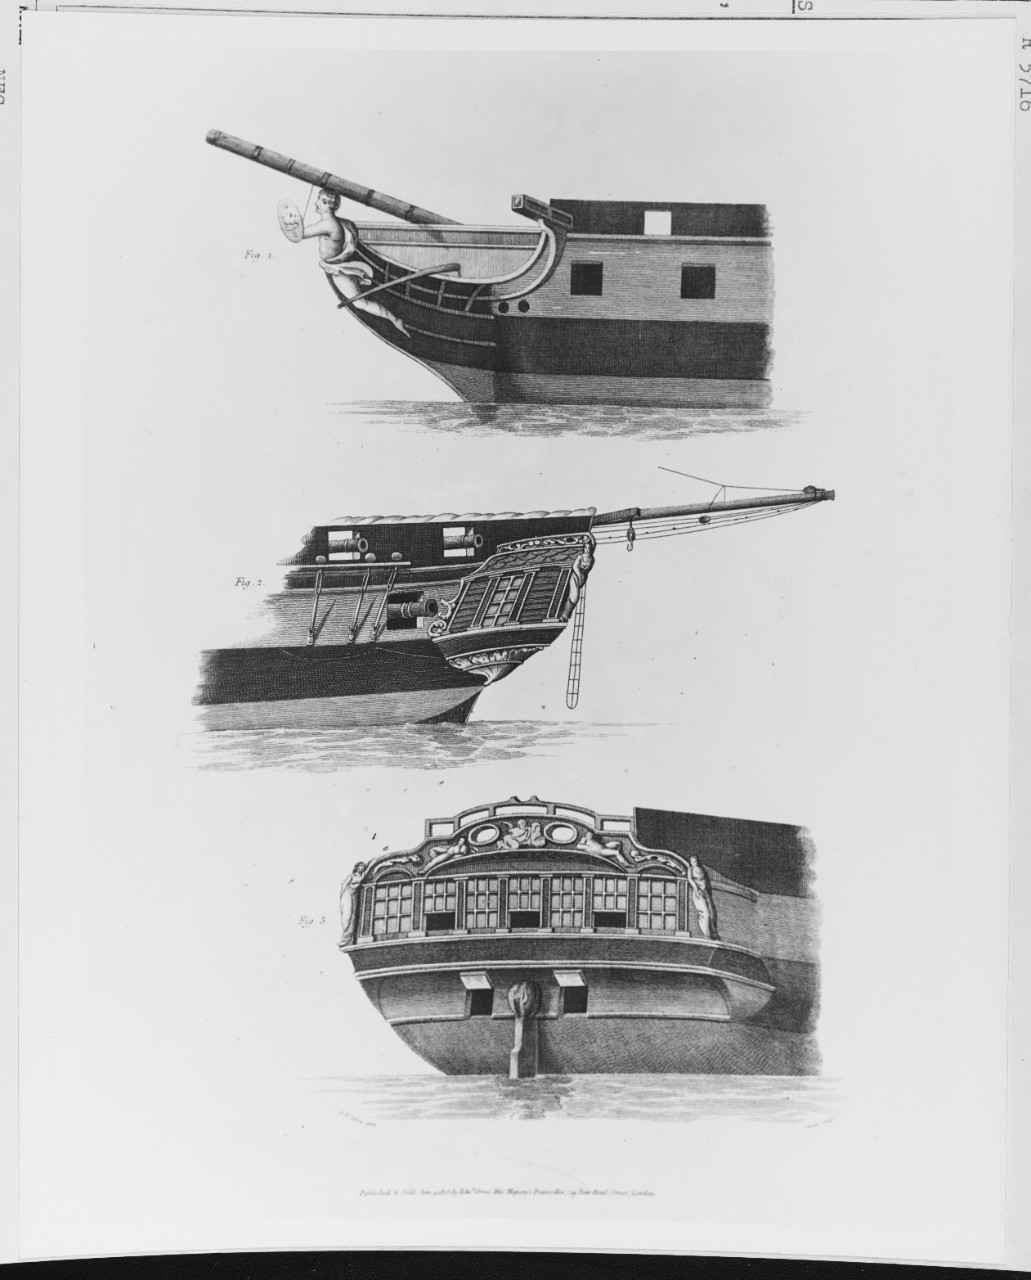 Head, Stern, and quarter of a frigate, about 1800